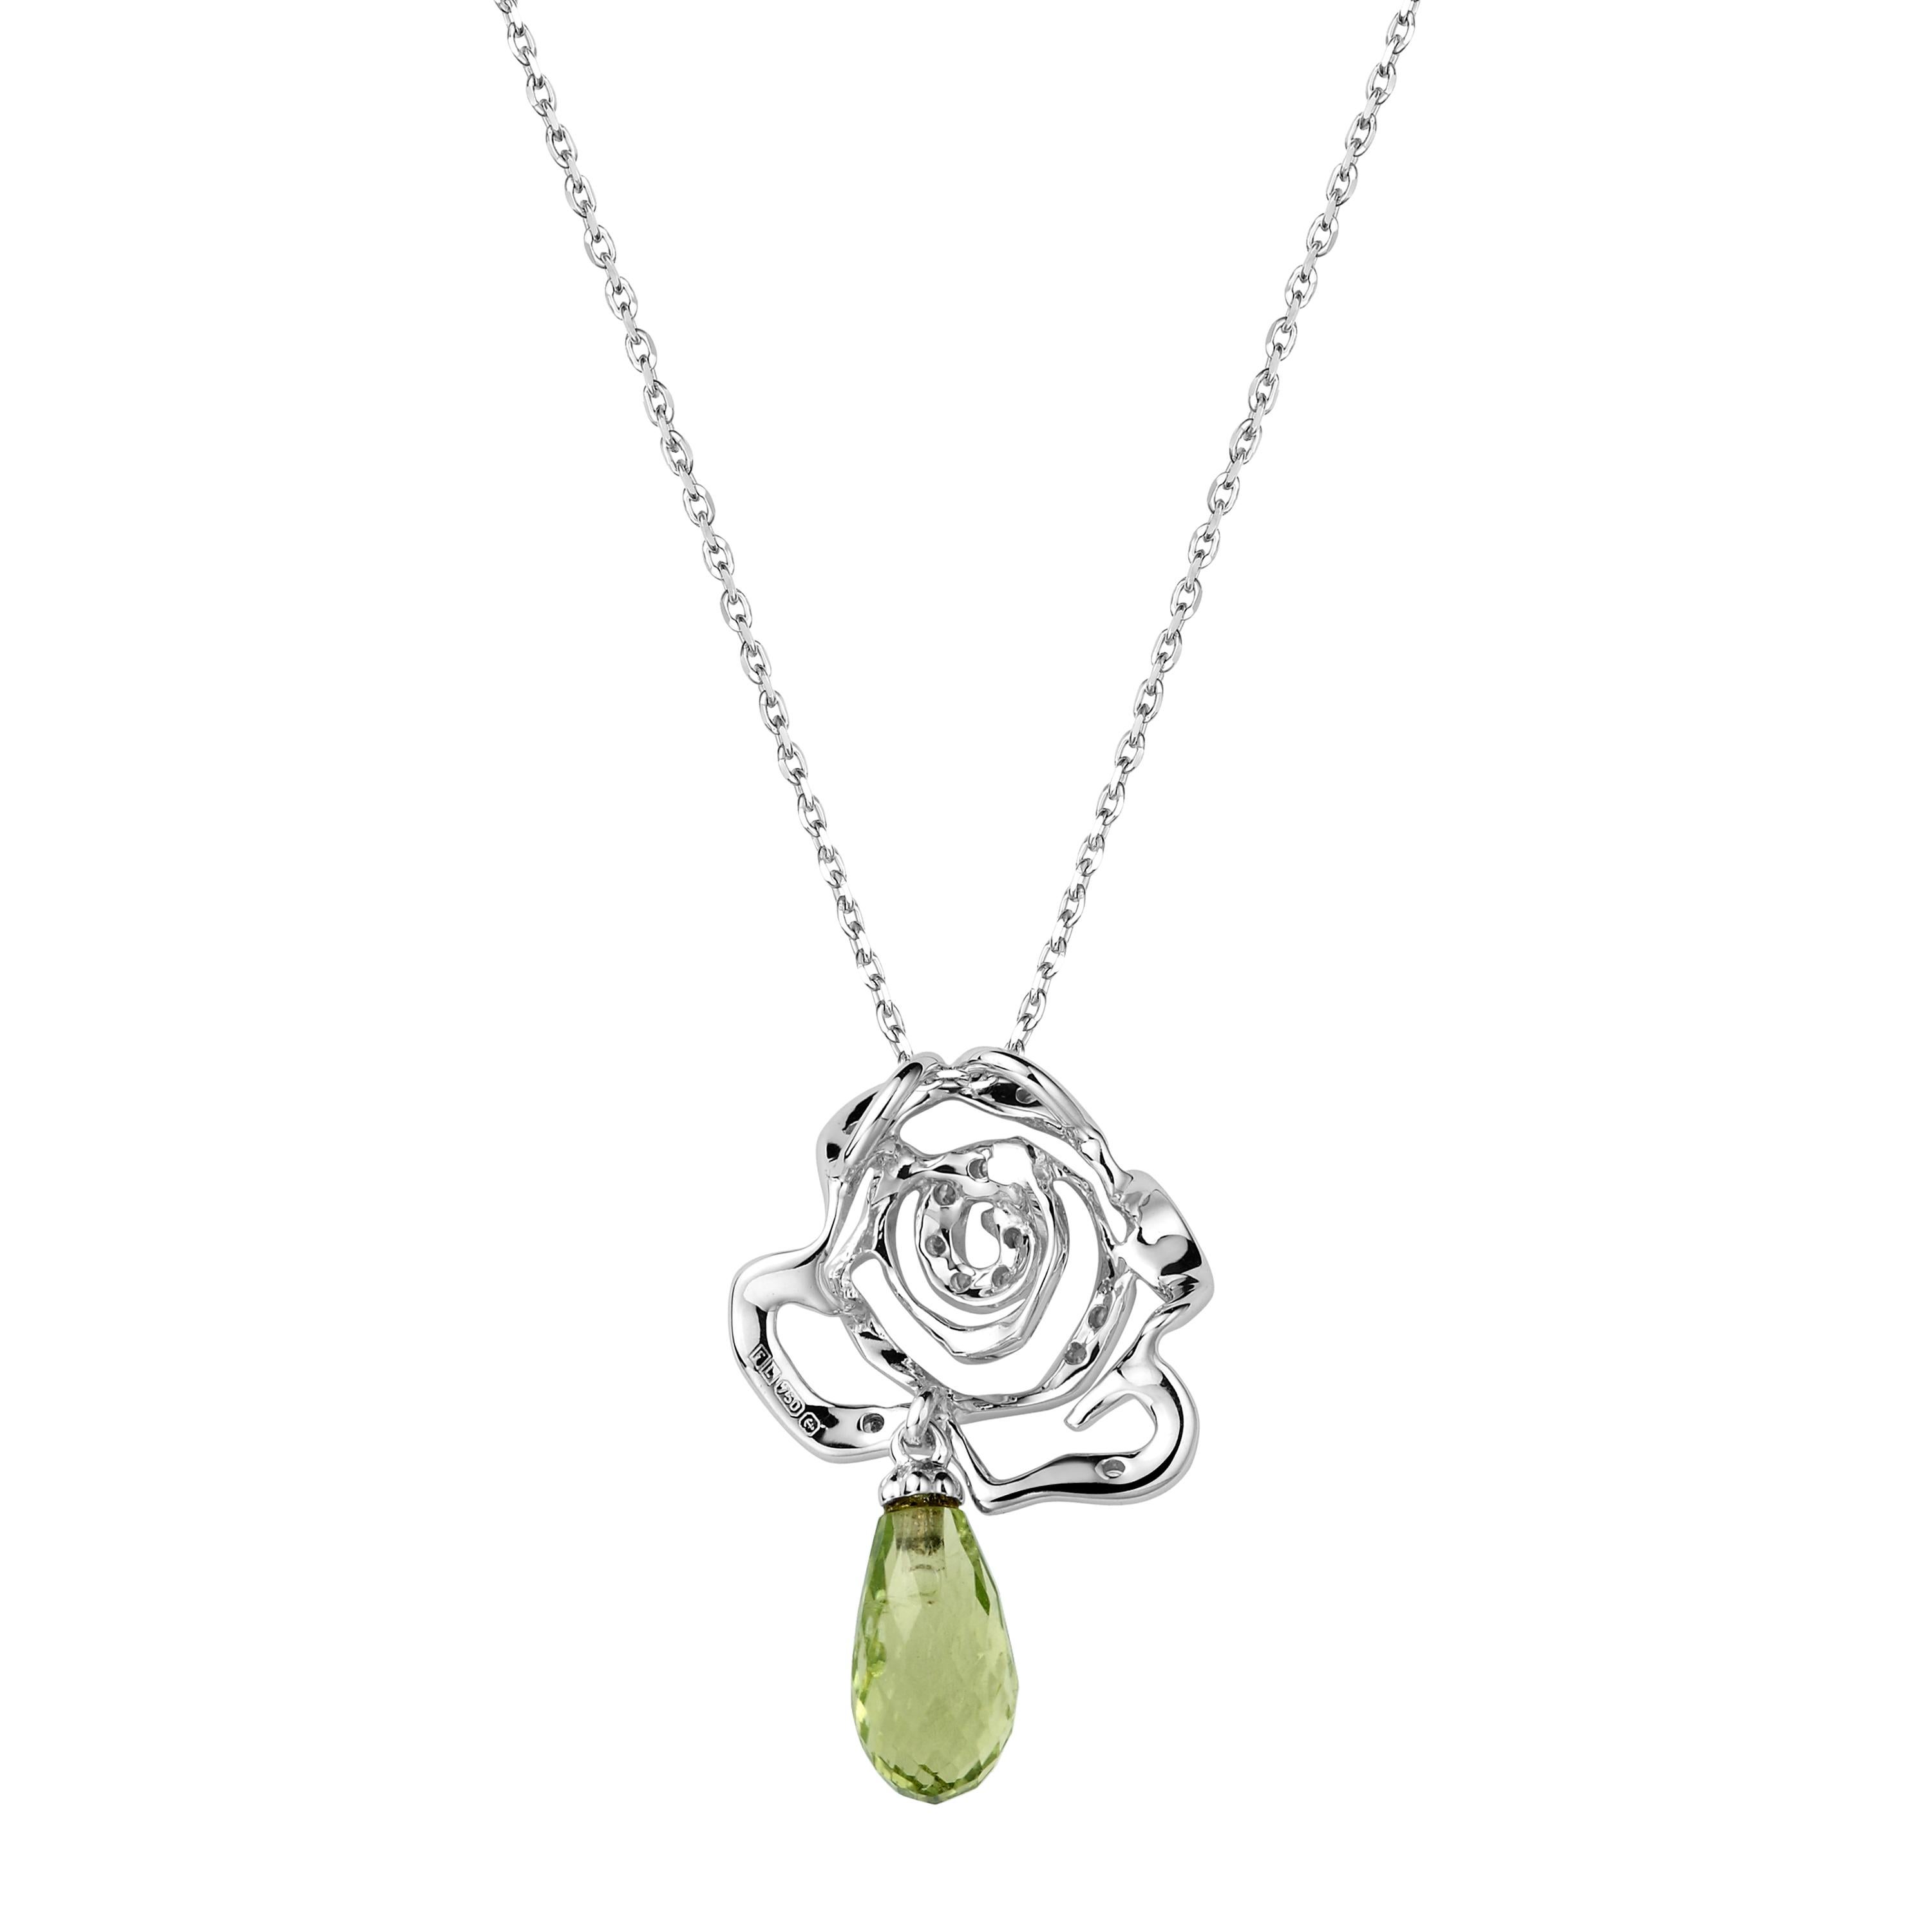 Description:
As enchanting as the real-life flower, the Rose collection offers a modern yet feminine look. This pendant features delicate 18ct white gold rose set with 0.02ct diamond and suspends a verdant 0.8ct peridot